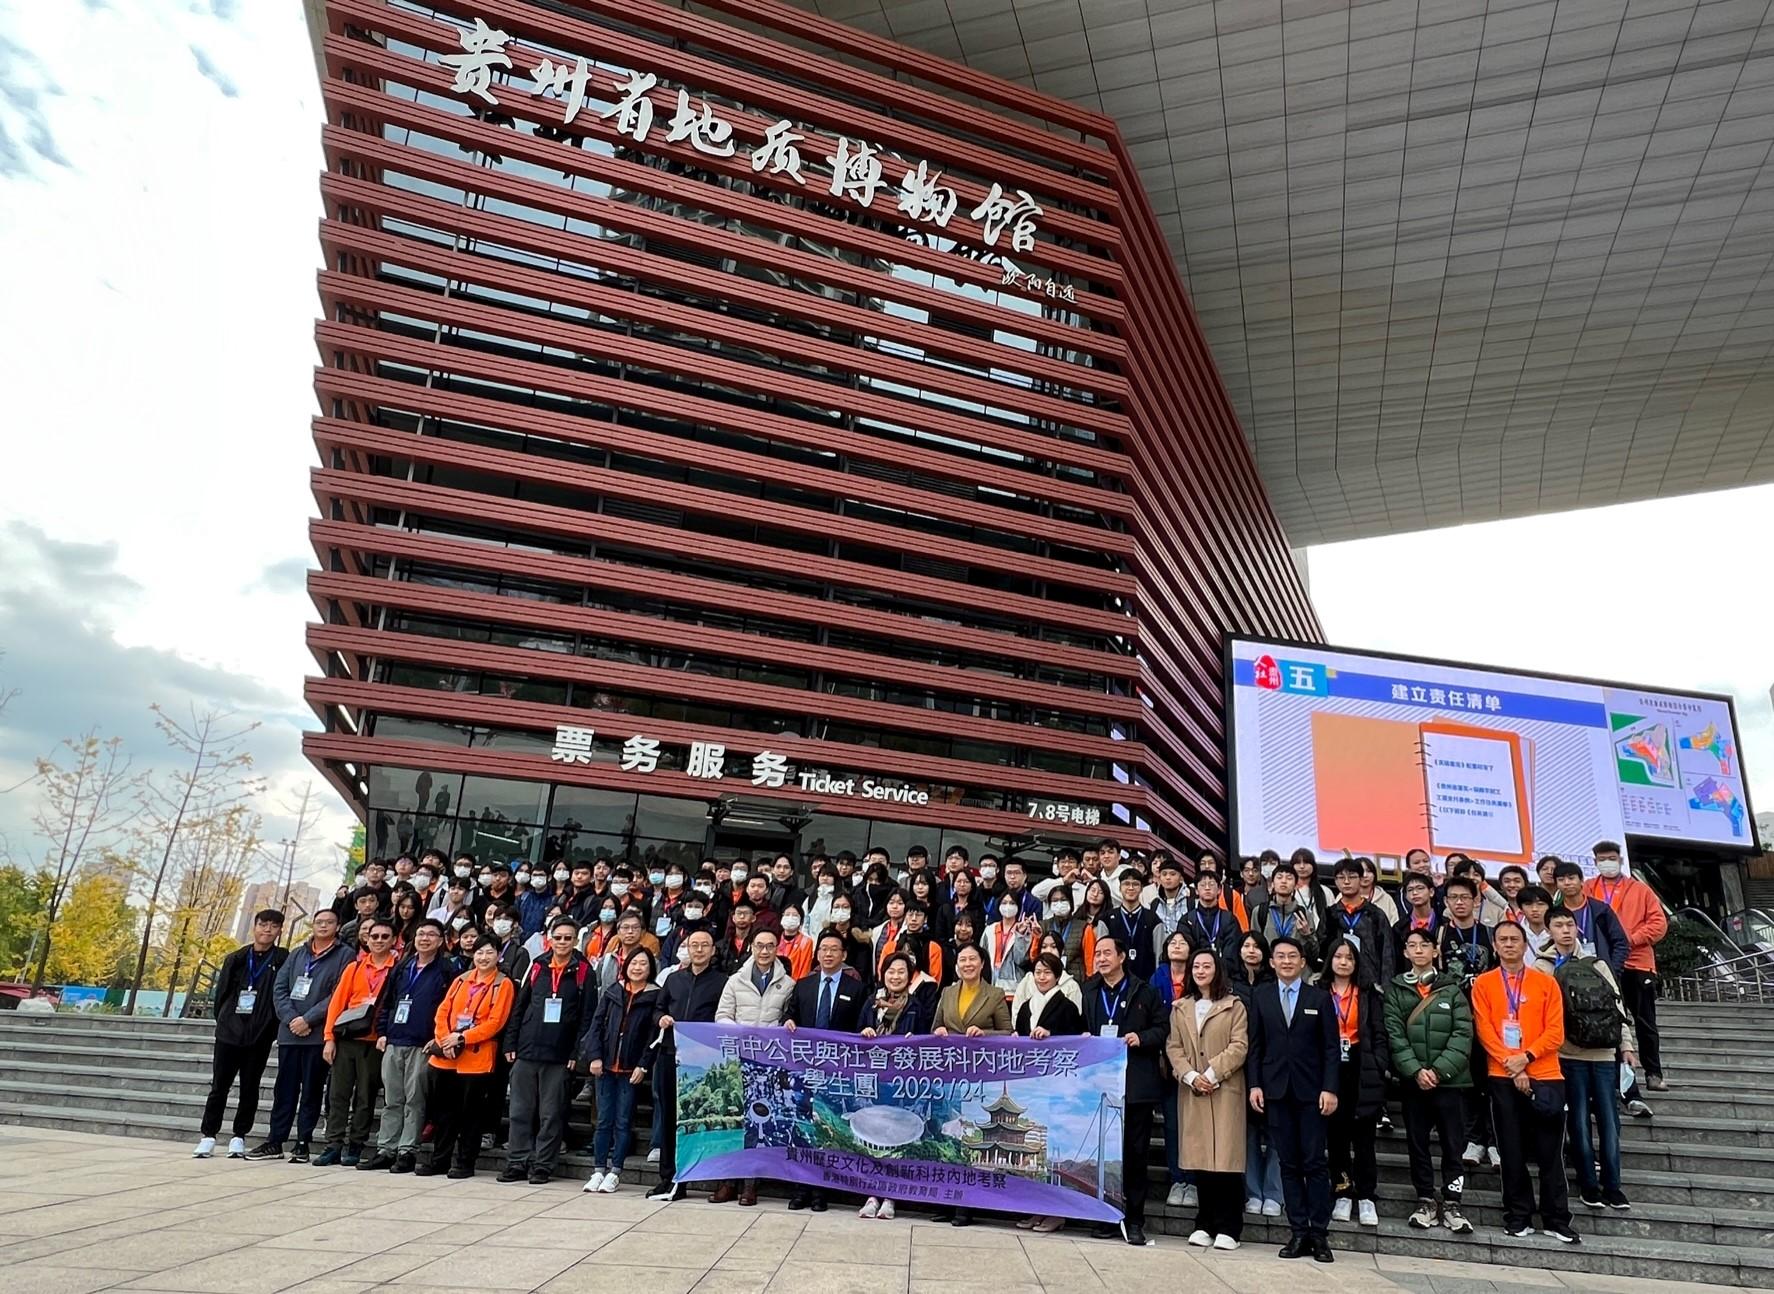 The Secretary for Education, Dr Choi Yuk-lin (first row, sixth right), visited the Geological Museum of Guizhou yesterday (November 16) together with students and teachers joining the first Mainland study tour outside Guangdong Province of the senior secondary subject of Citizenship and Social Development.